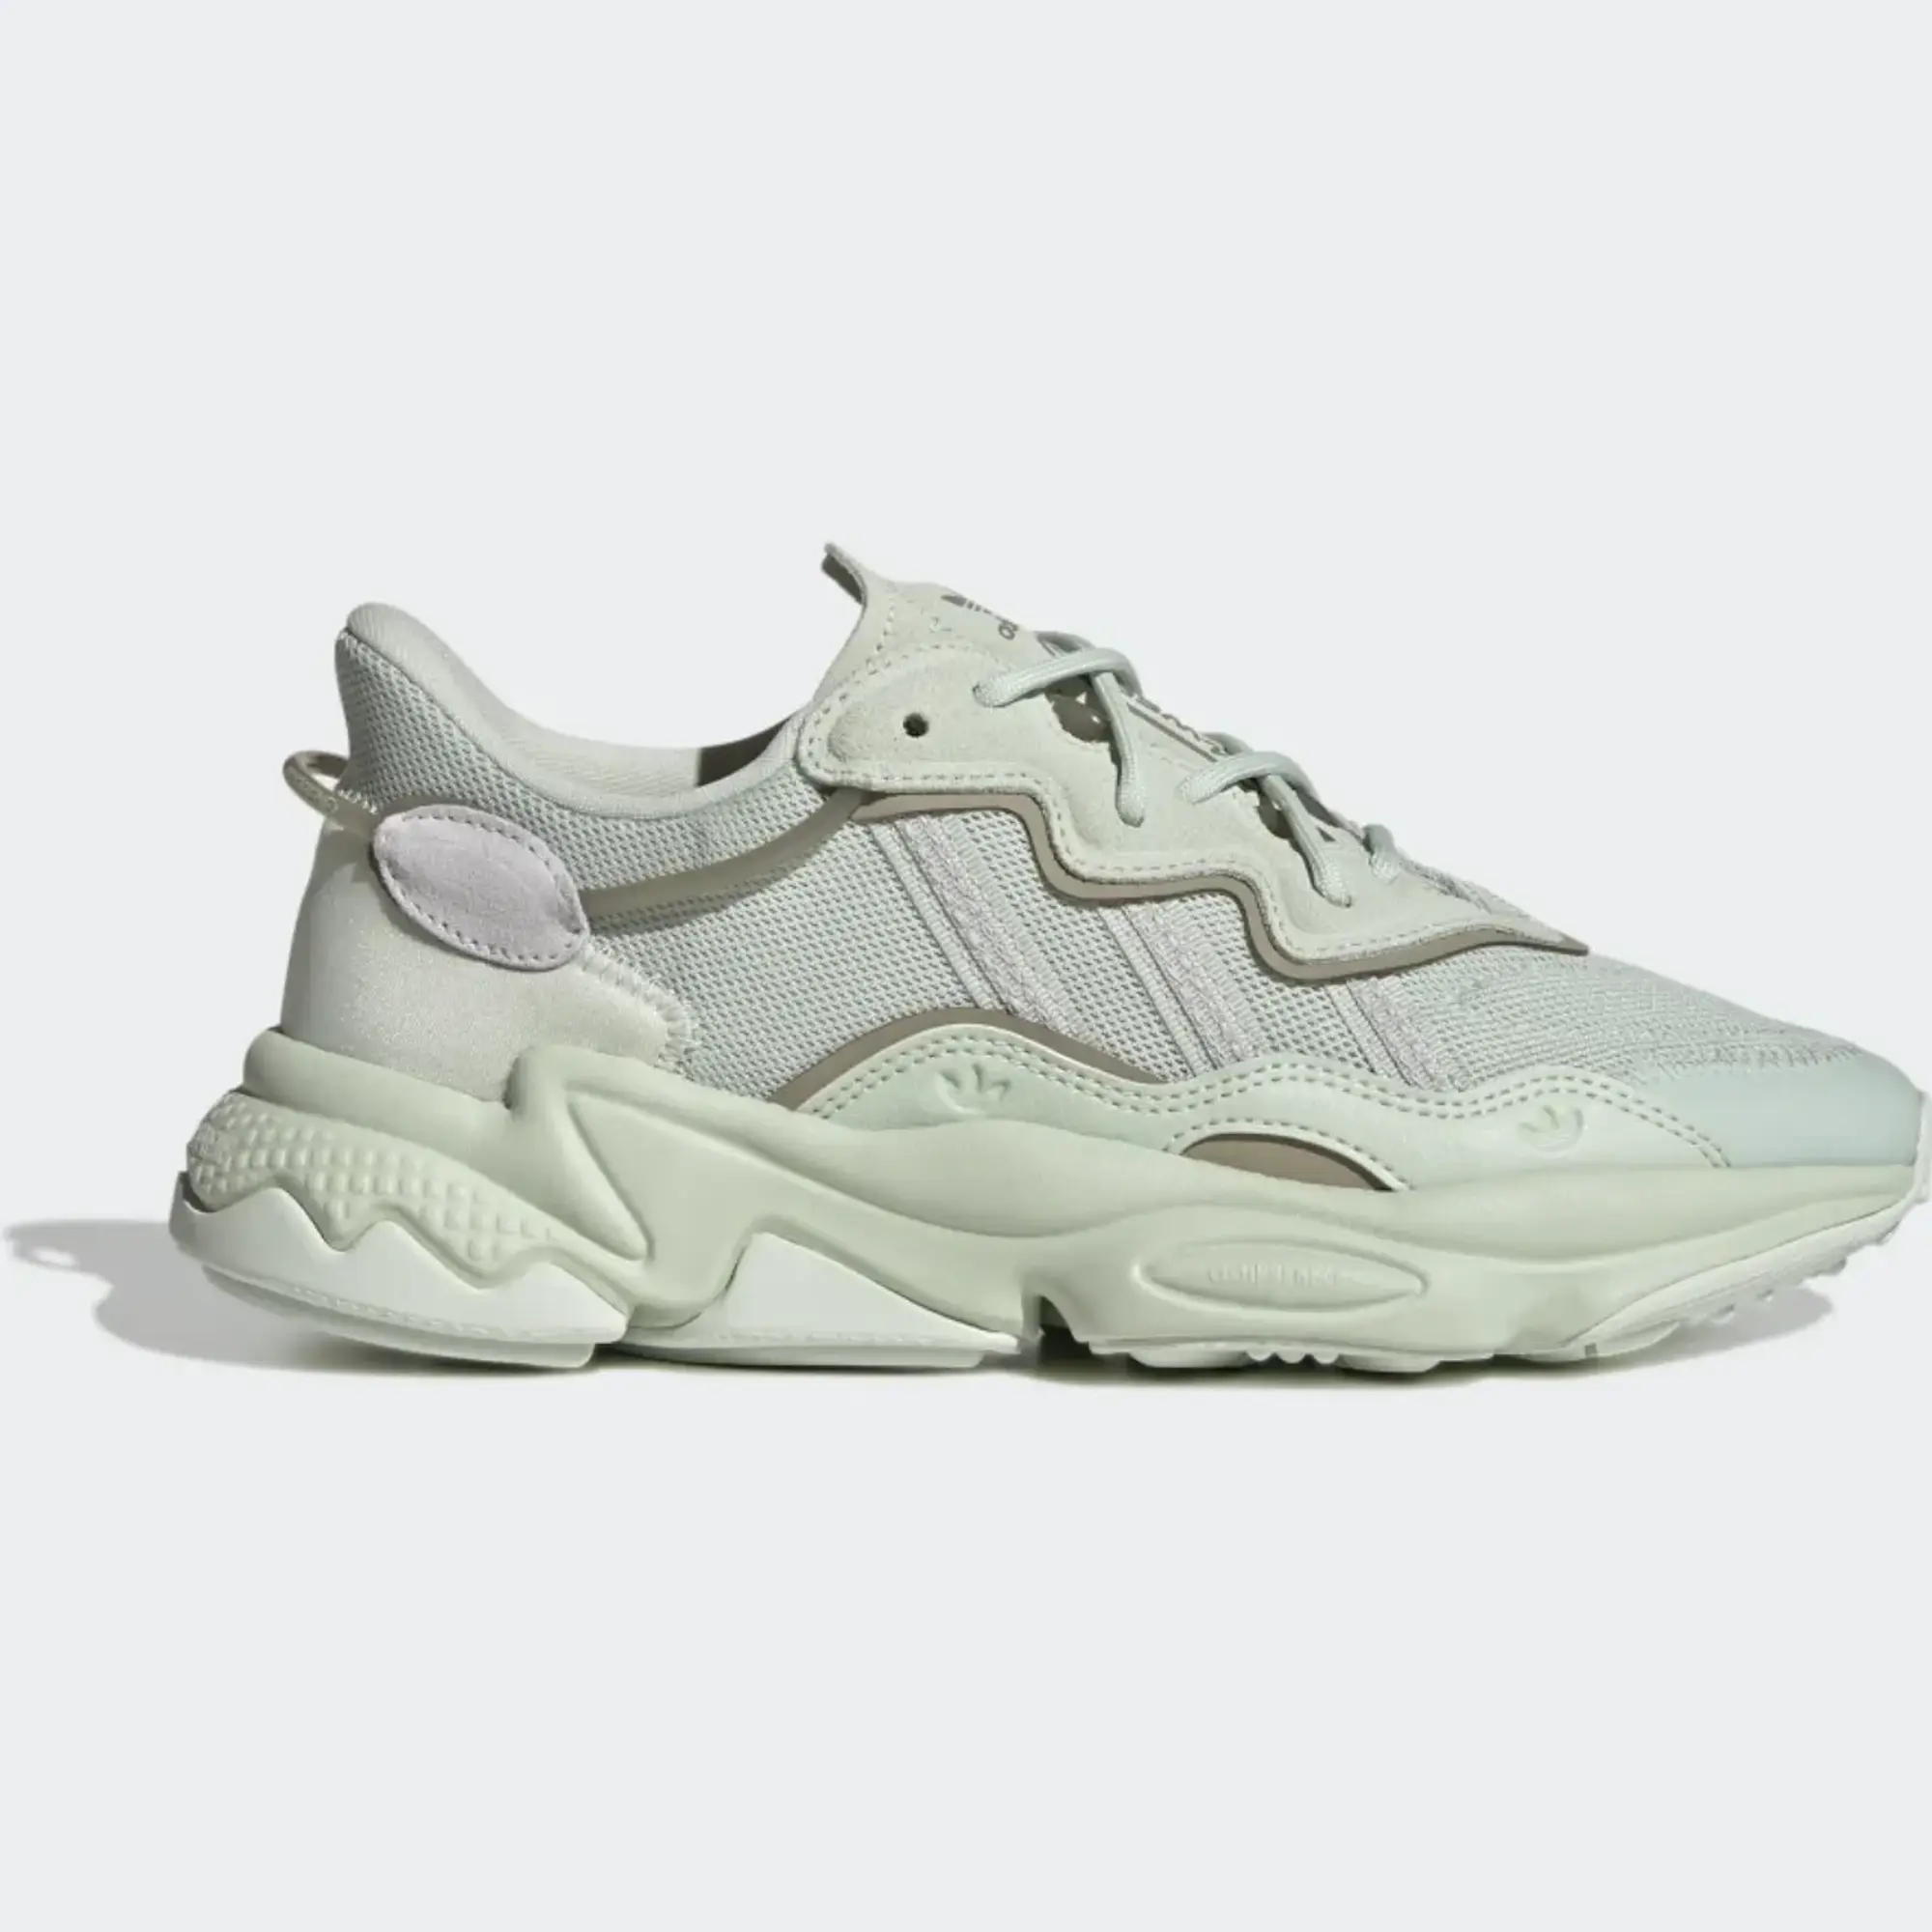 Adidas Originals Ozweego Trainers In Pale Mint-Green